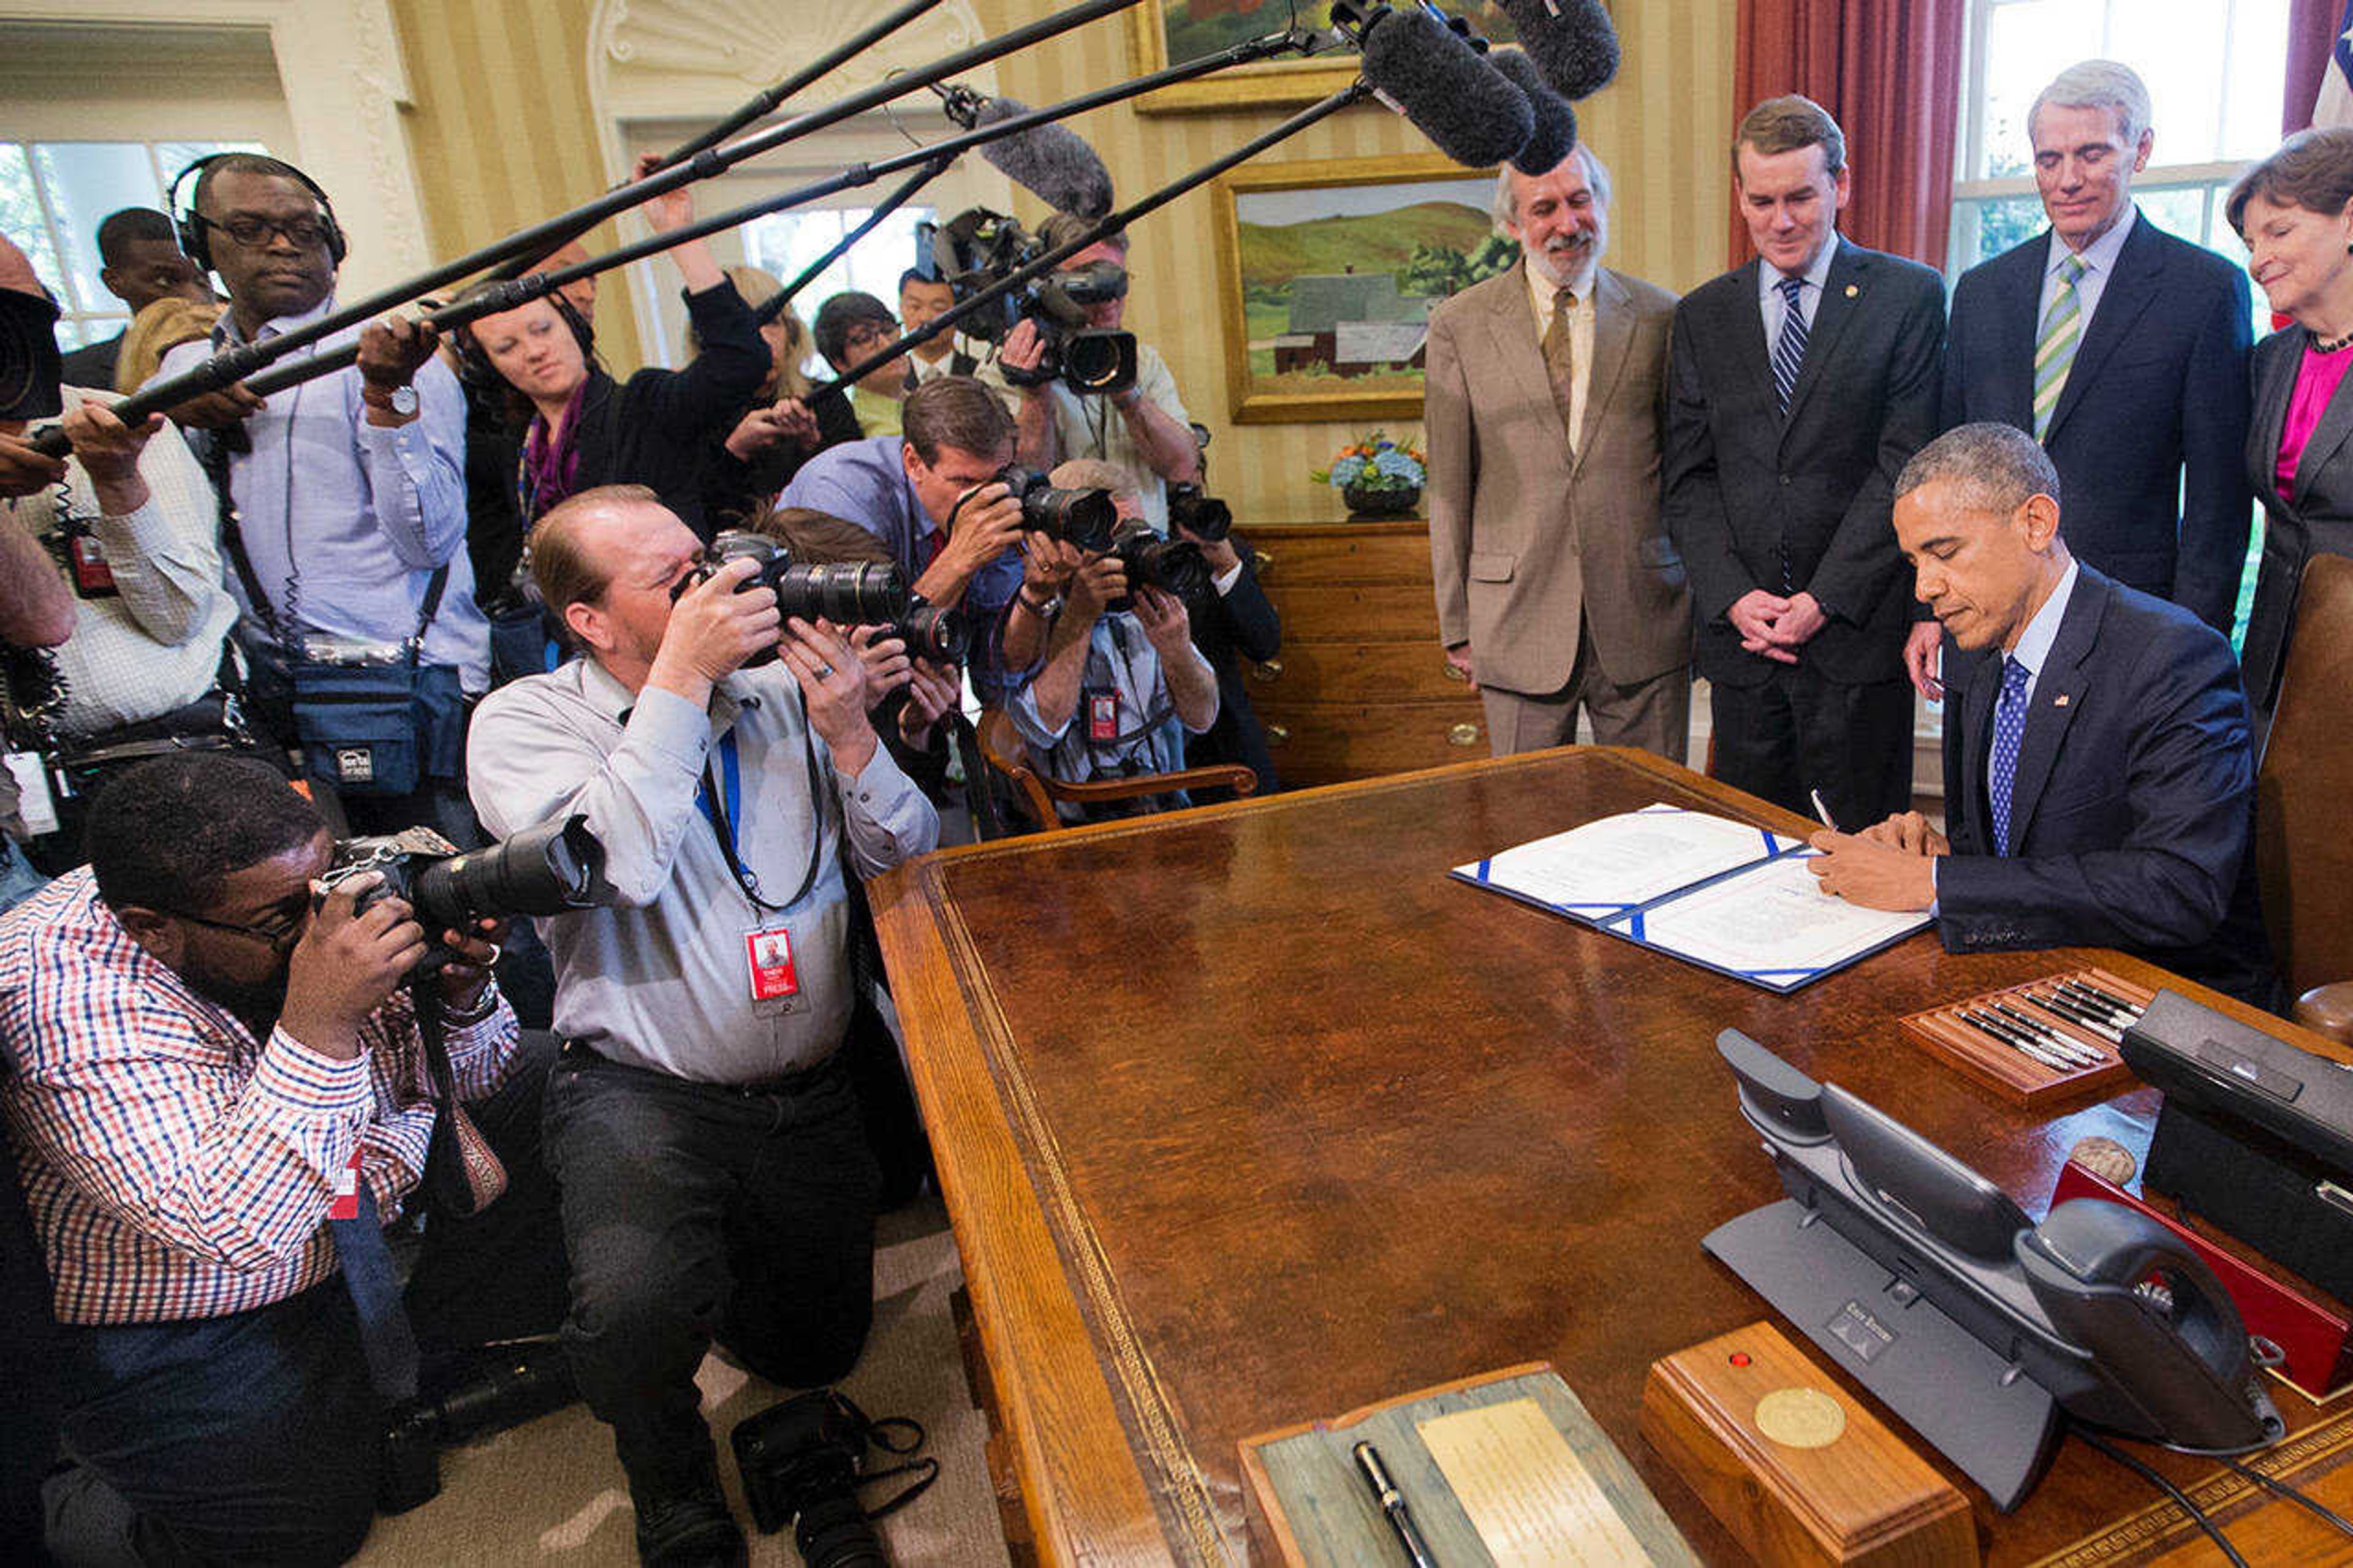 Kneeling left, Michael Thomas photographs President Barack Obama as he signs bill S. 535 Energy Efficiency Improvement Act of 2015 in the Oval Office of the White House in Washington, Thursday, April 30, 2015.